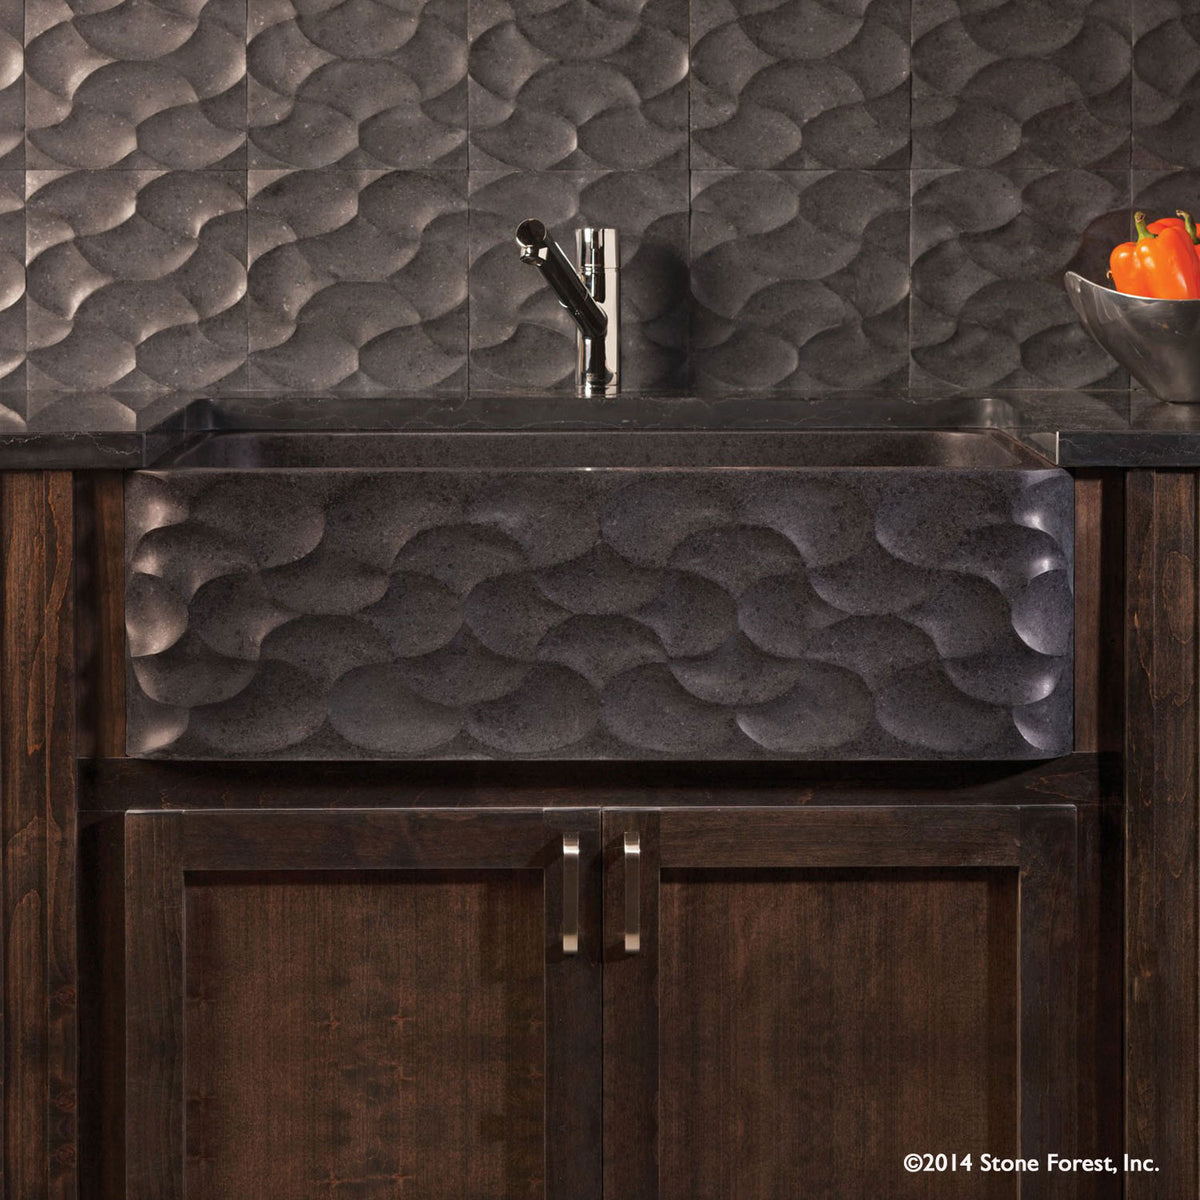 Wave Front Farmhouse sink carved from basalt with a honed finish. image 1 of 1